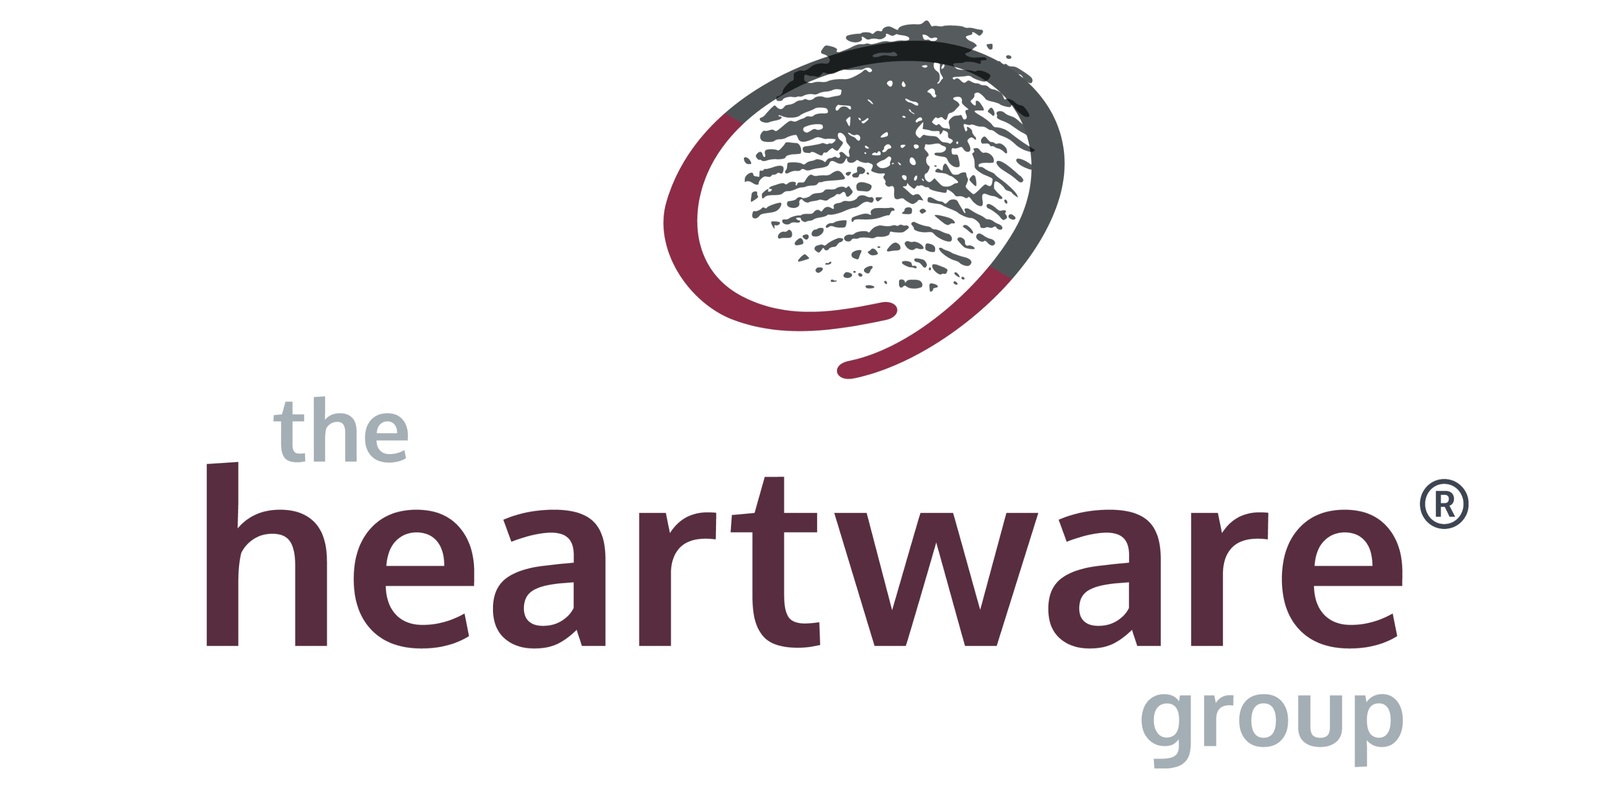 The Heartware Group's banner